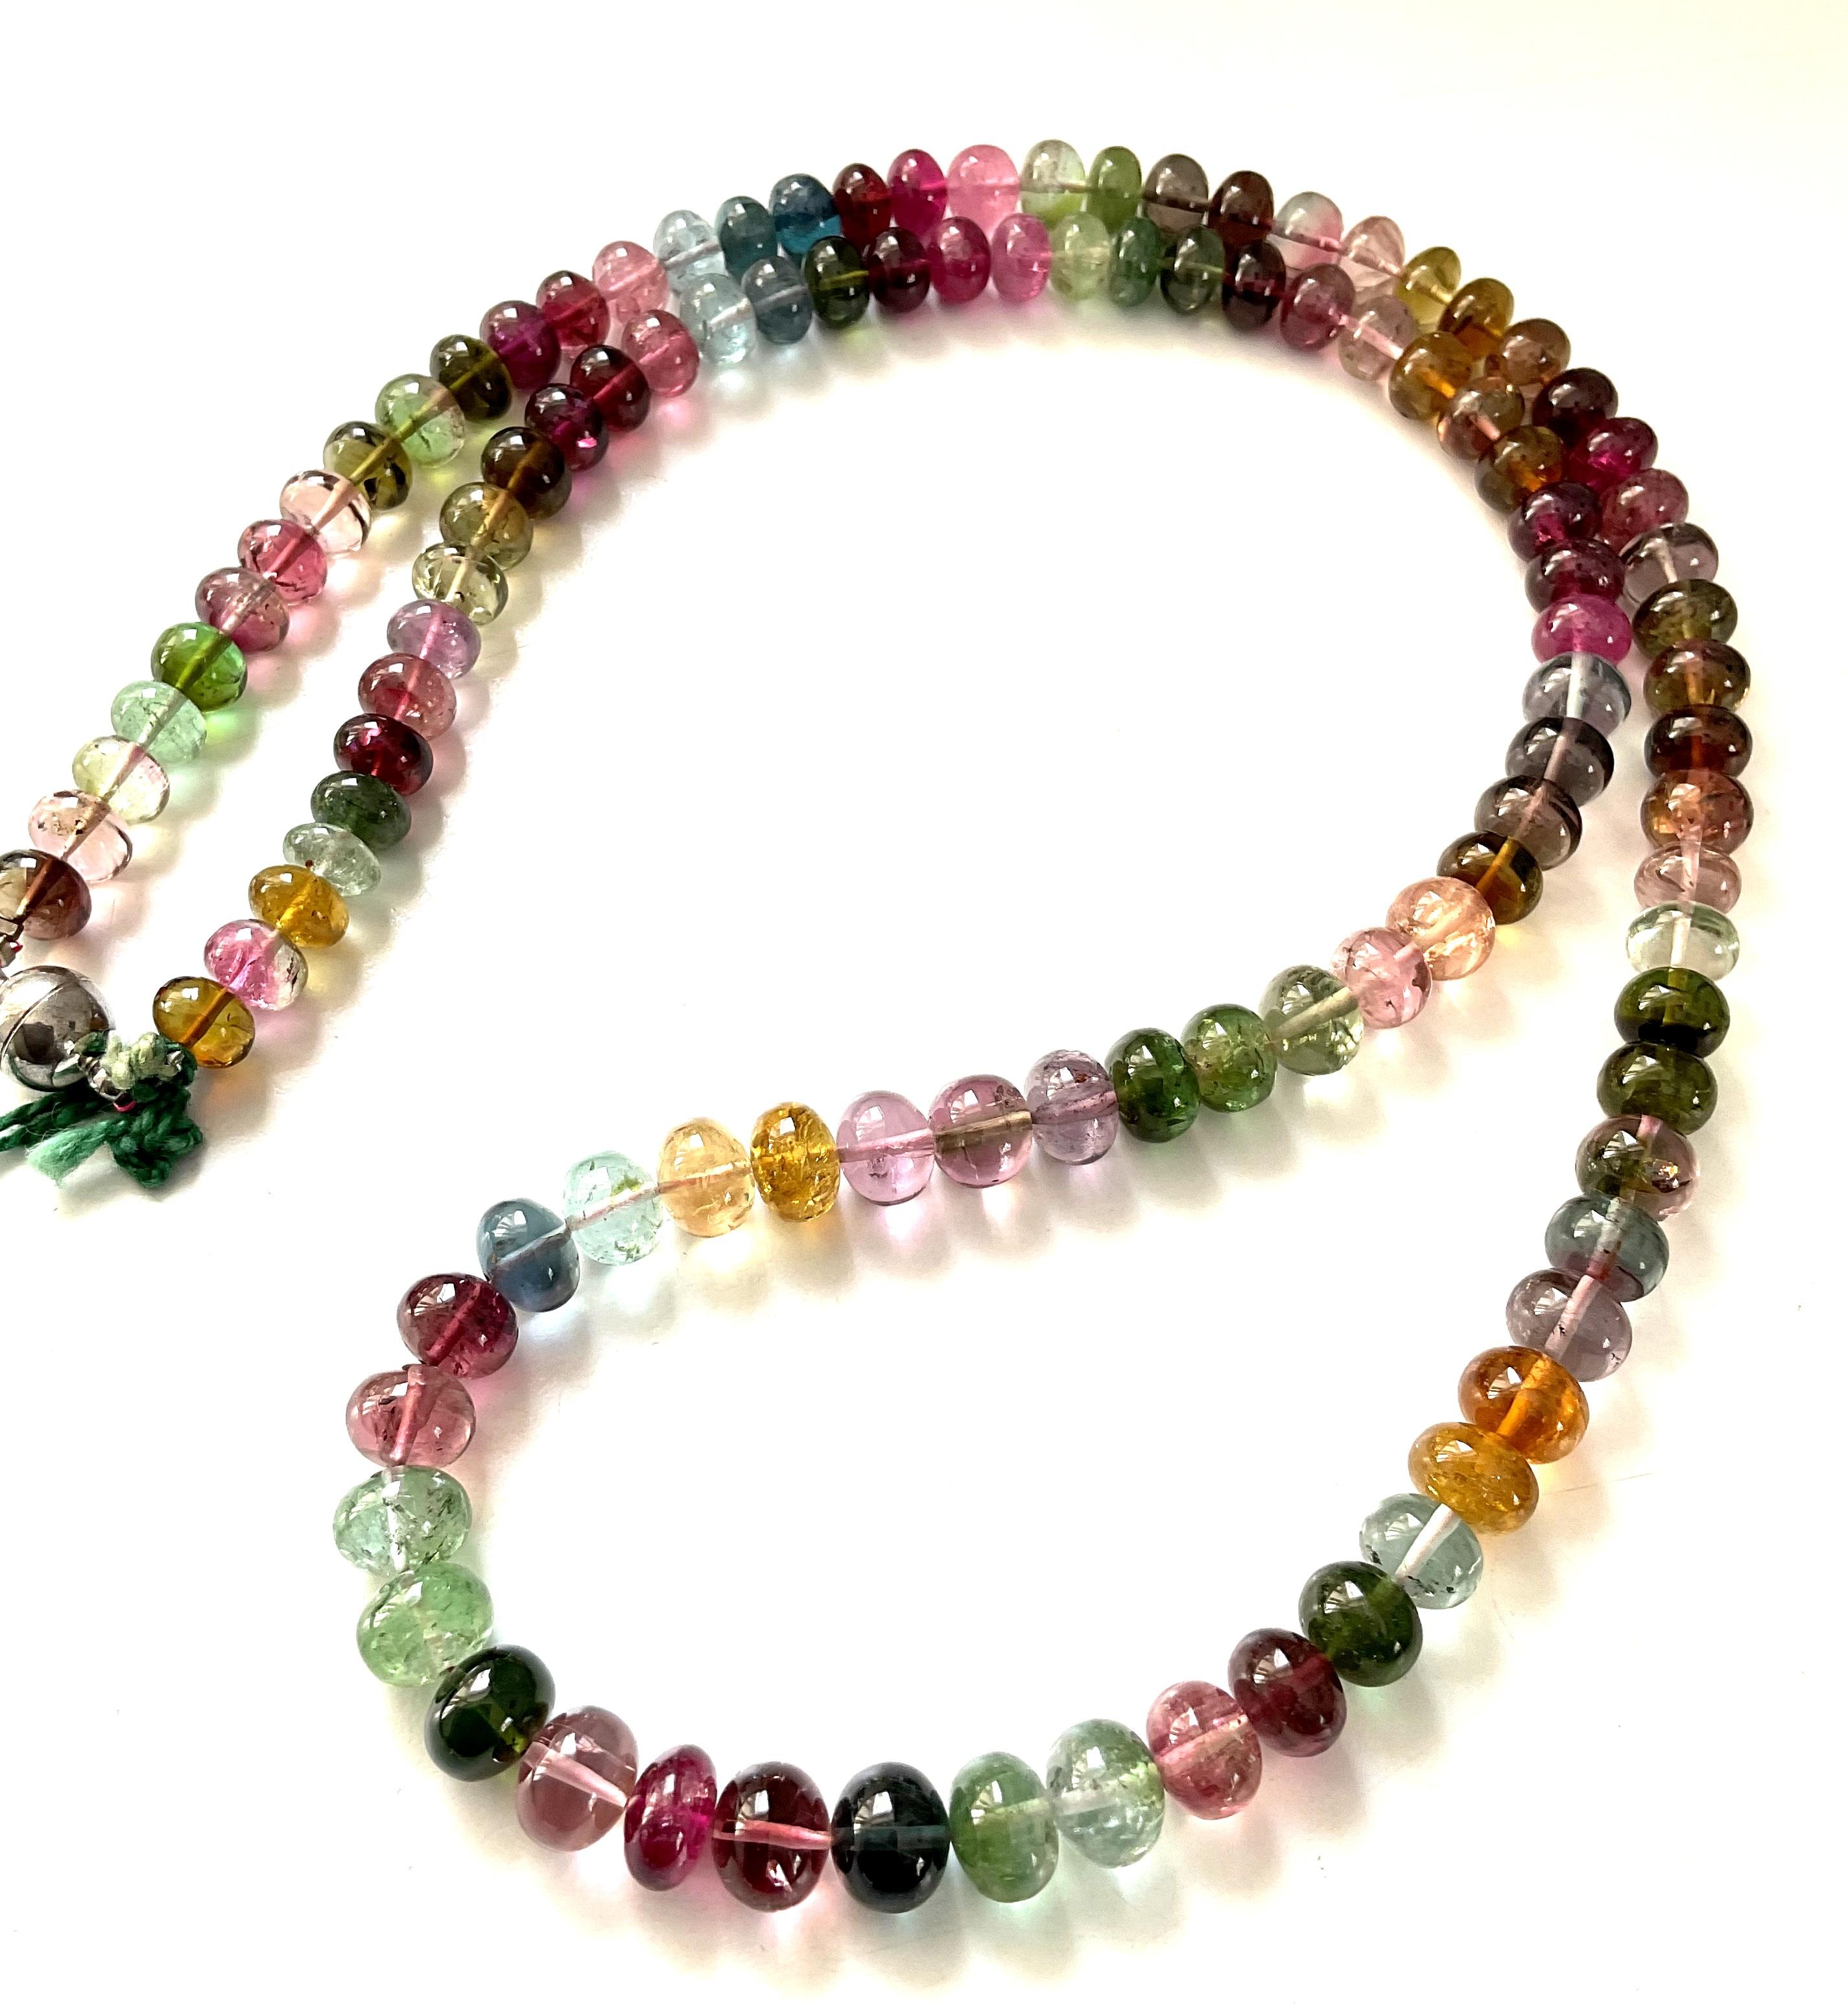 275.50 Carats Multi Tourmaline Plain Beads Necklace For Fine Jewelry For Sale 2